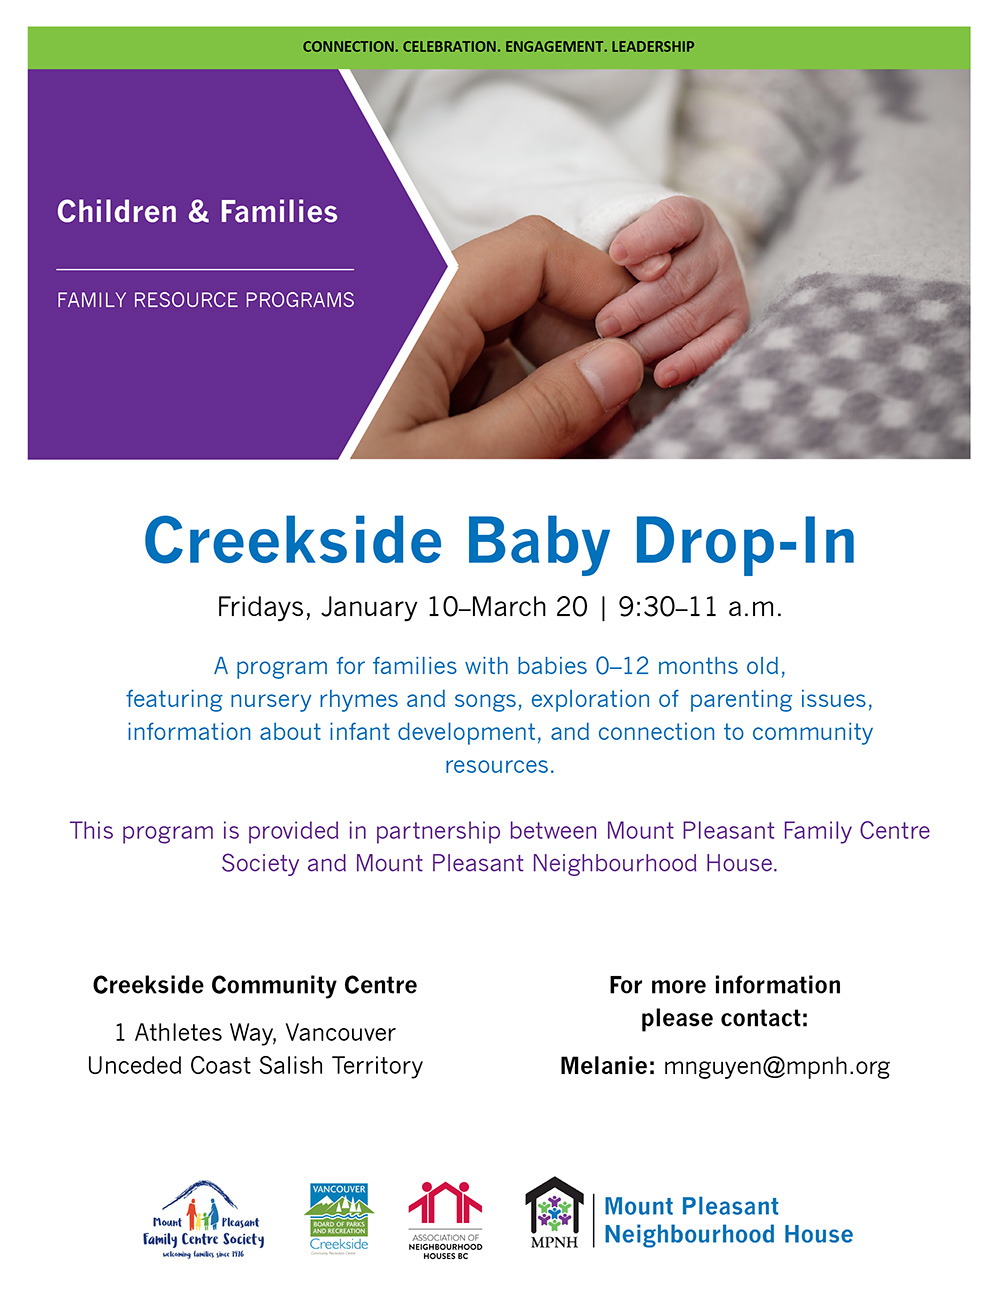 Poster for the Creekside Baby Drop-In showing a baby's toes